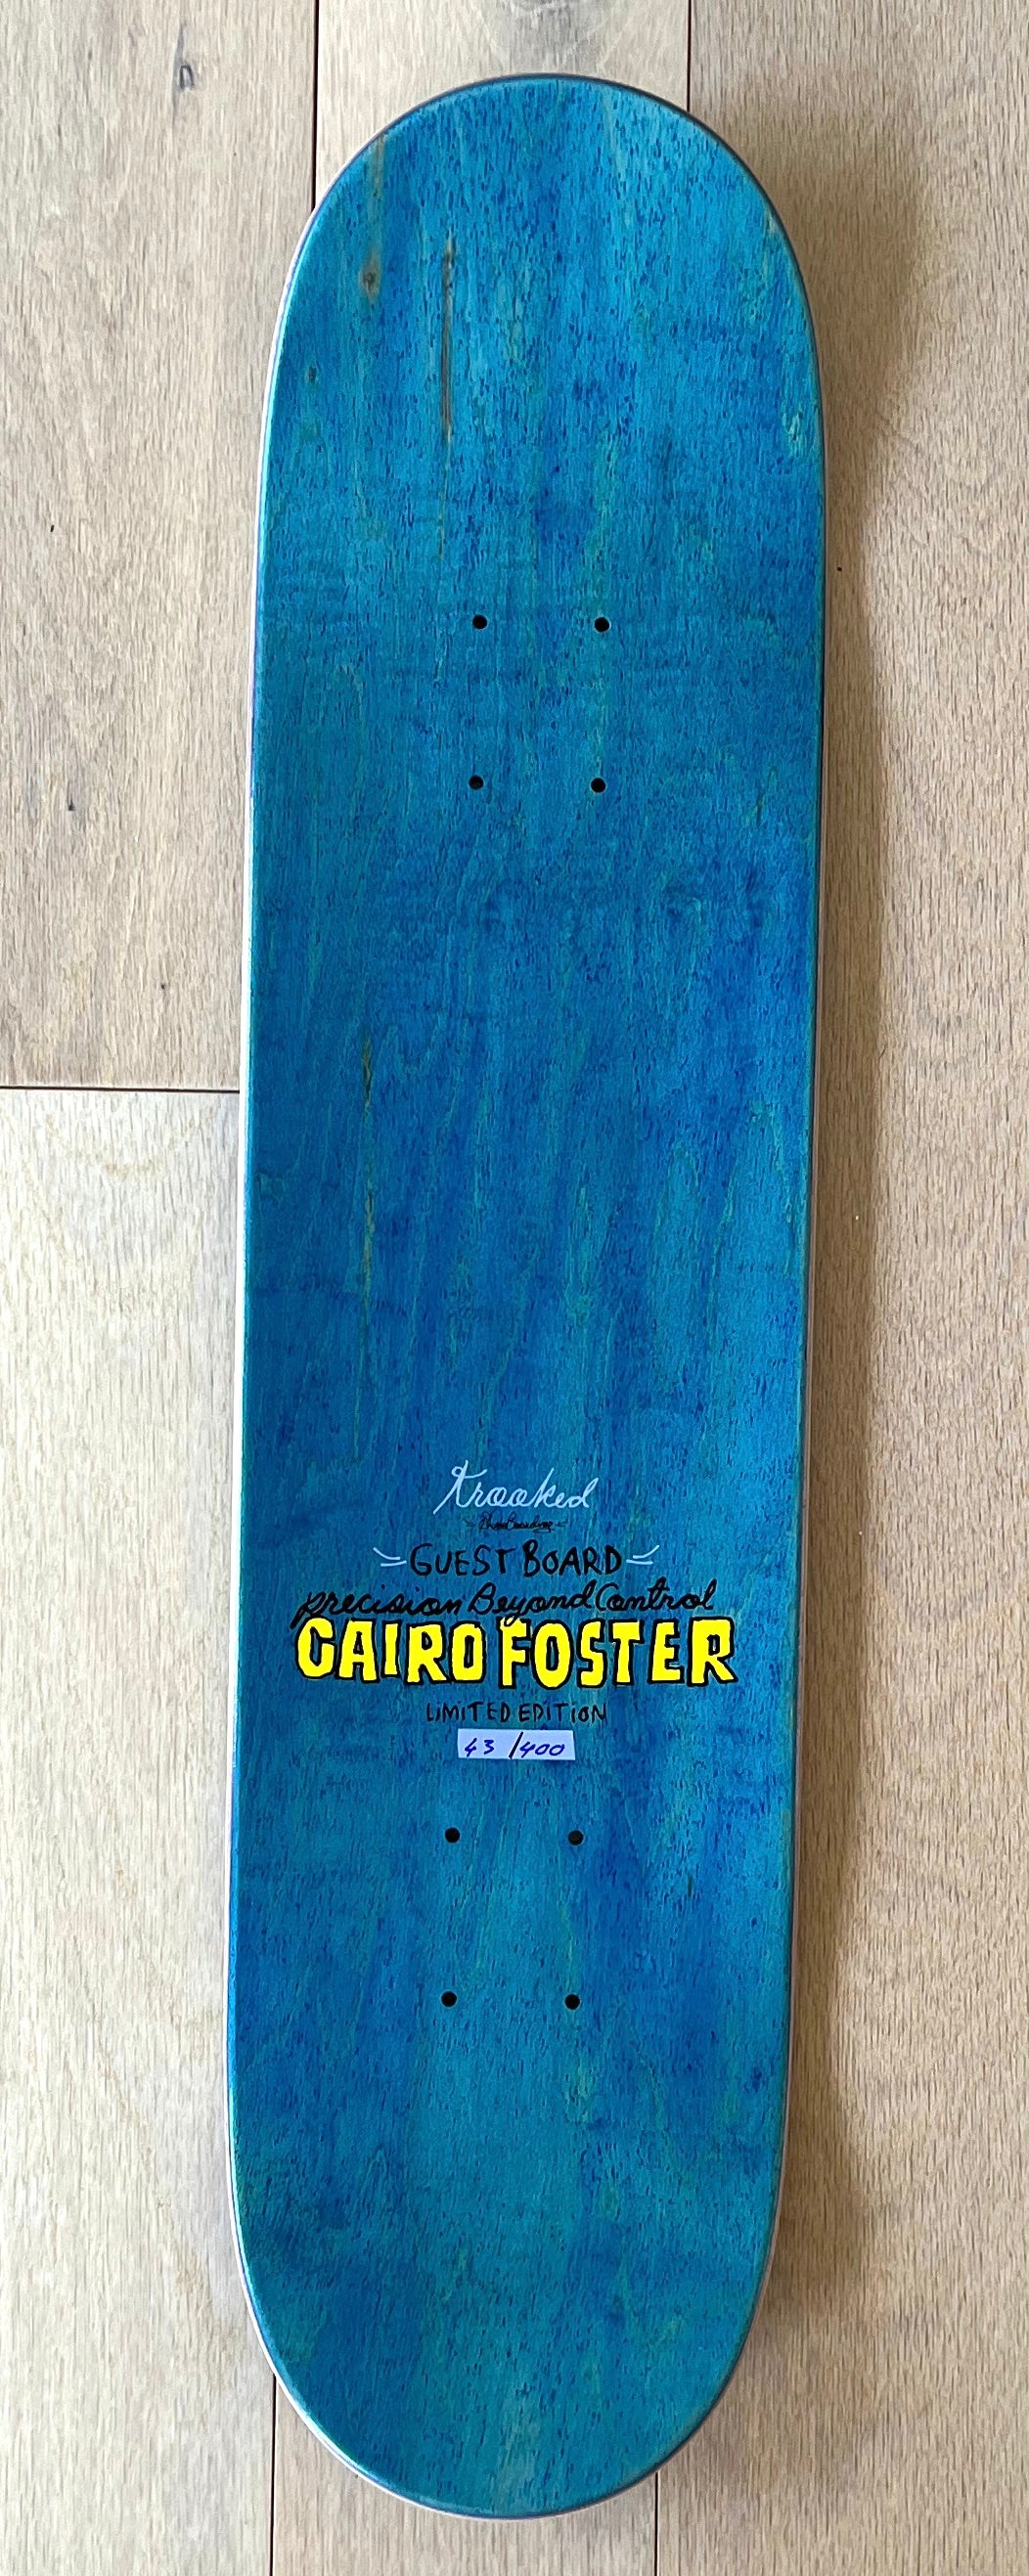 Mark Gonzales x Krooked "Cairo Foster Guest Board", 2004